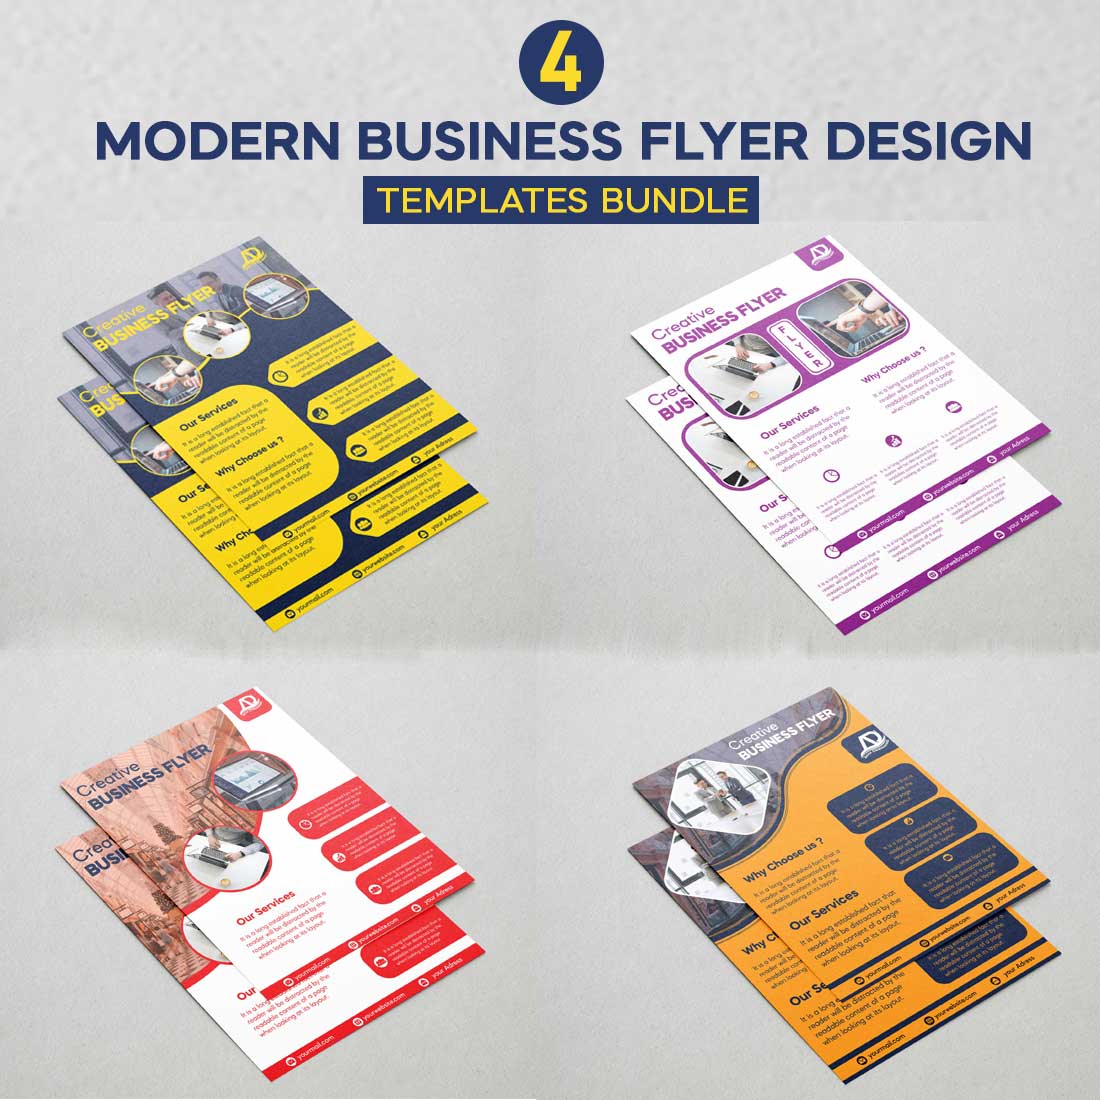 Modern Business Flyer Template Design cover image.